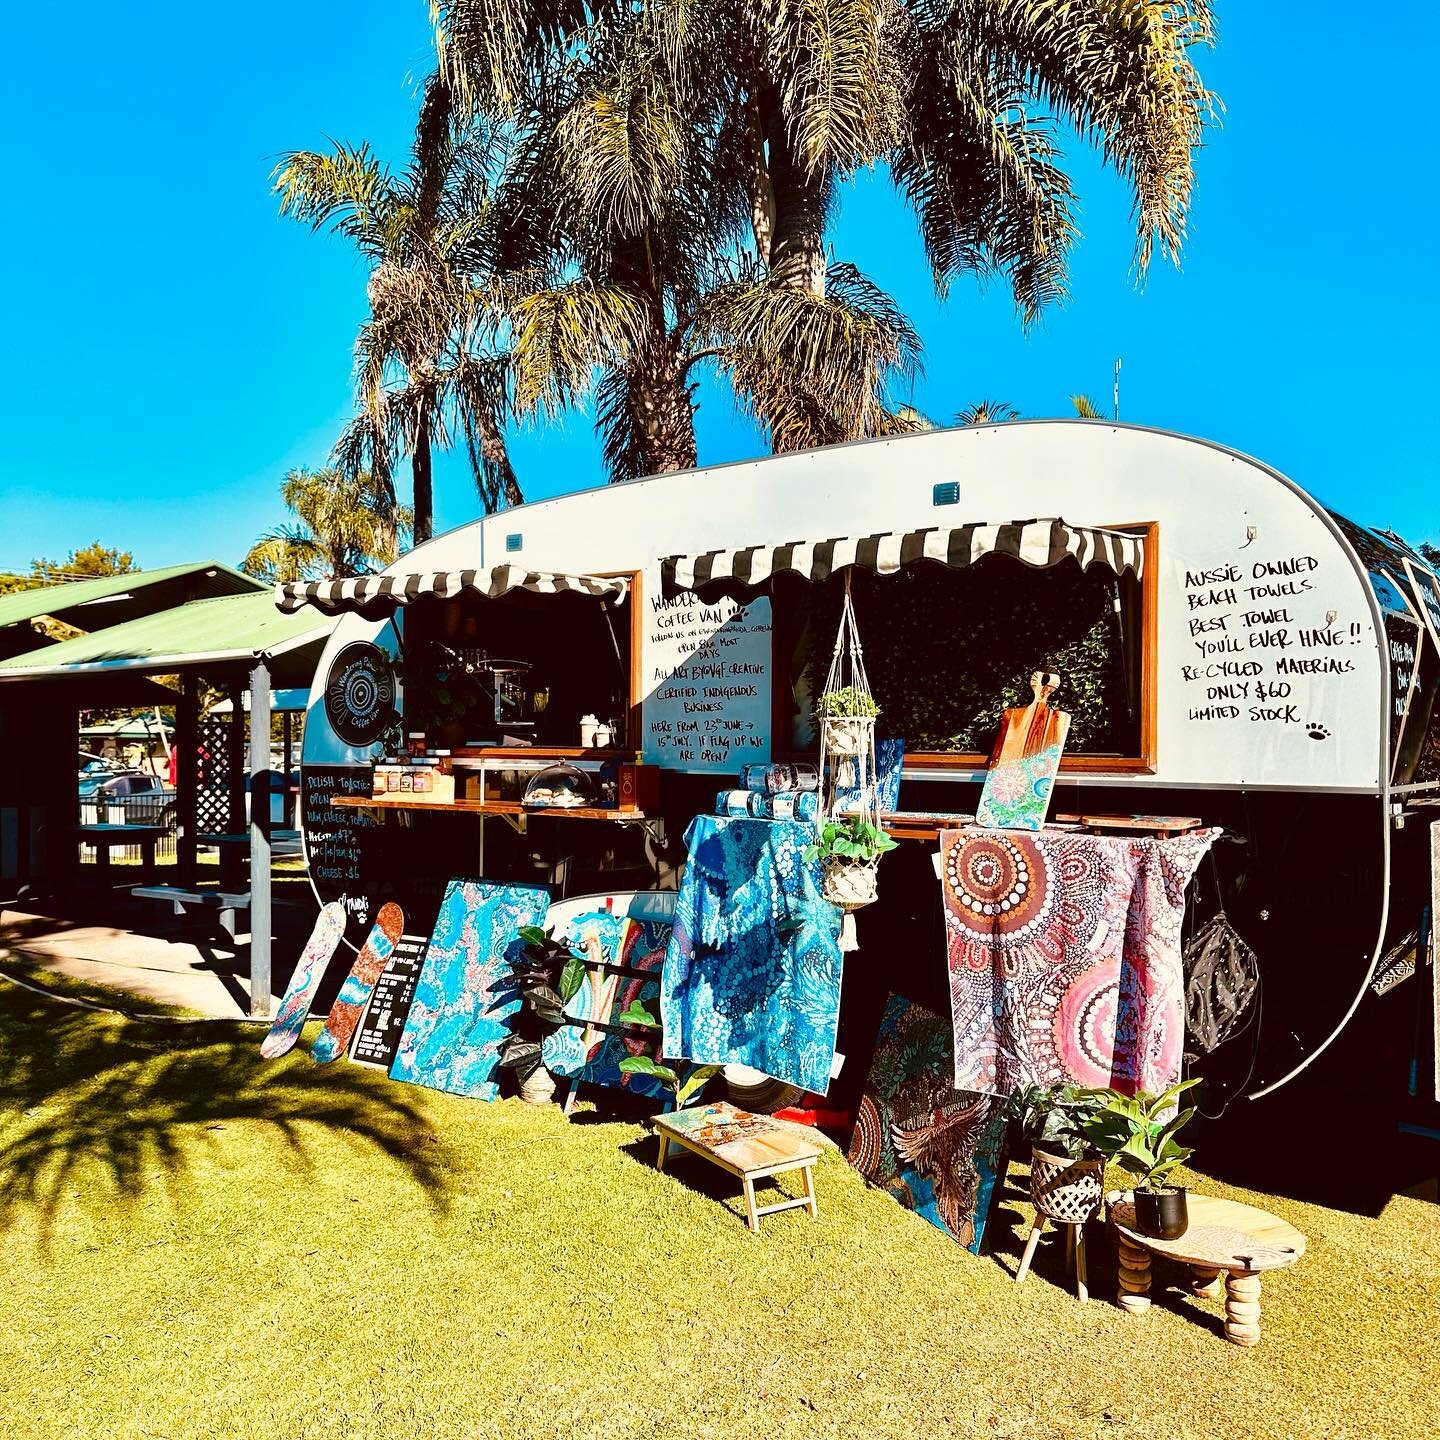 Loving Kingscliff!!

Set up here poolside for the school holidays!

Open Tuesday - Sunday 8am-12pm

Coffees, toasties, iced lattes and more!

Feel free to pop in and say gday 🫶

#kingscliff #ingeniaholidayparks 
#poolside #fulltimetravellingfamily#t